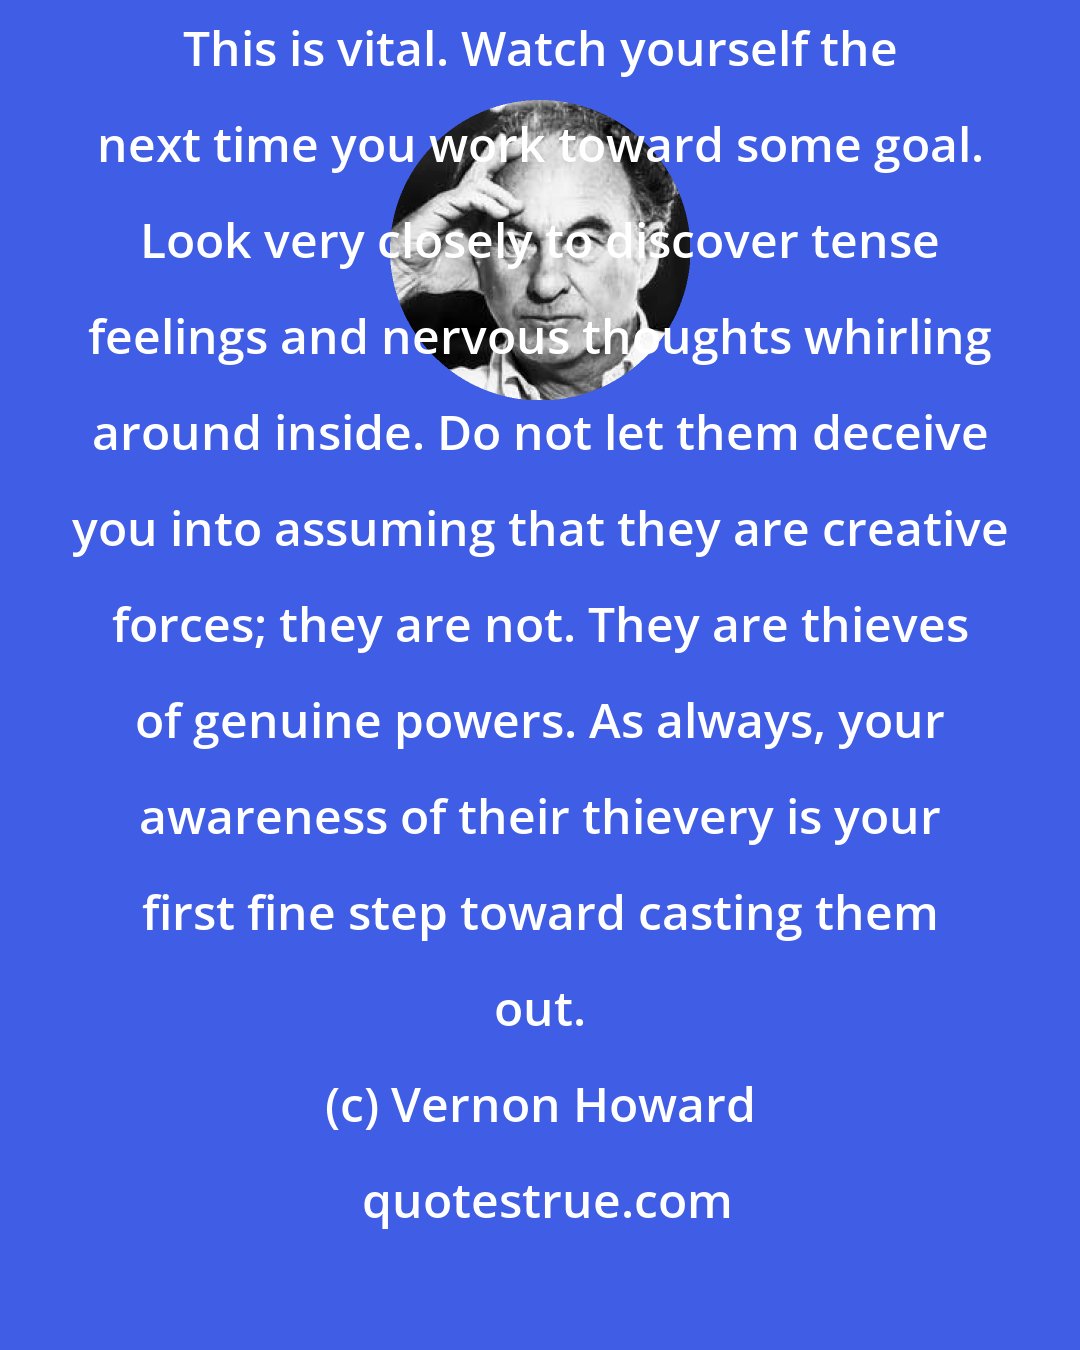 Vernon Howard: Be very careful that you do not unconsciously assume that nervous tension is power. This is vital. Watch yourself the next time you work toward some goal. Look very closely to discover tense feelings and nervous thoughts whirling around inside. Do not let them deceive you into assuming that they are creative forces; they are not. They are thieves of genuine powers. As always, your awareness of their thievery is your first fine step toward casting them out.